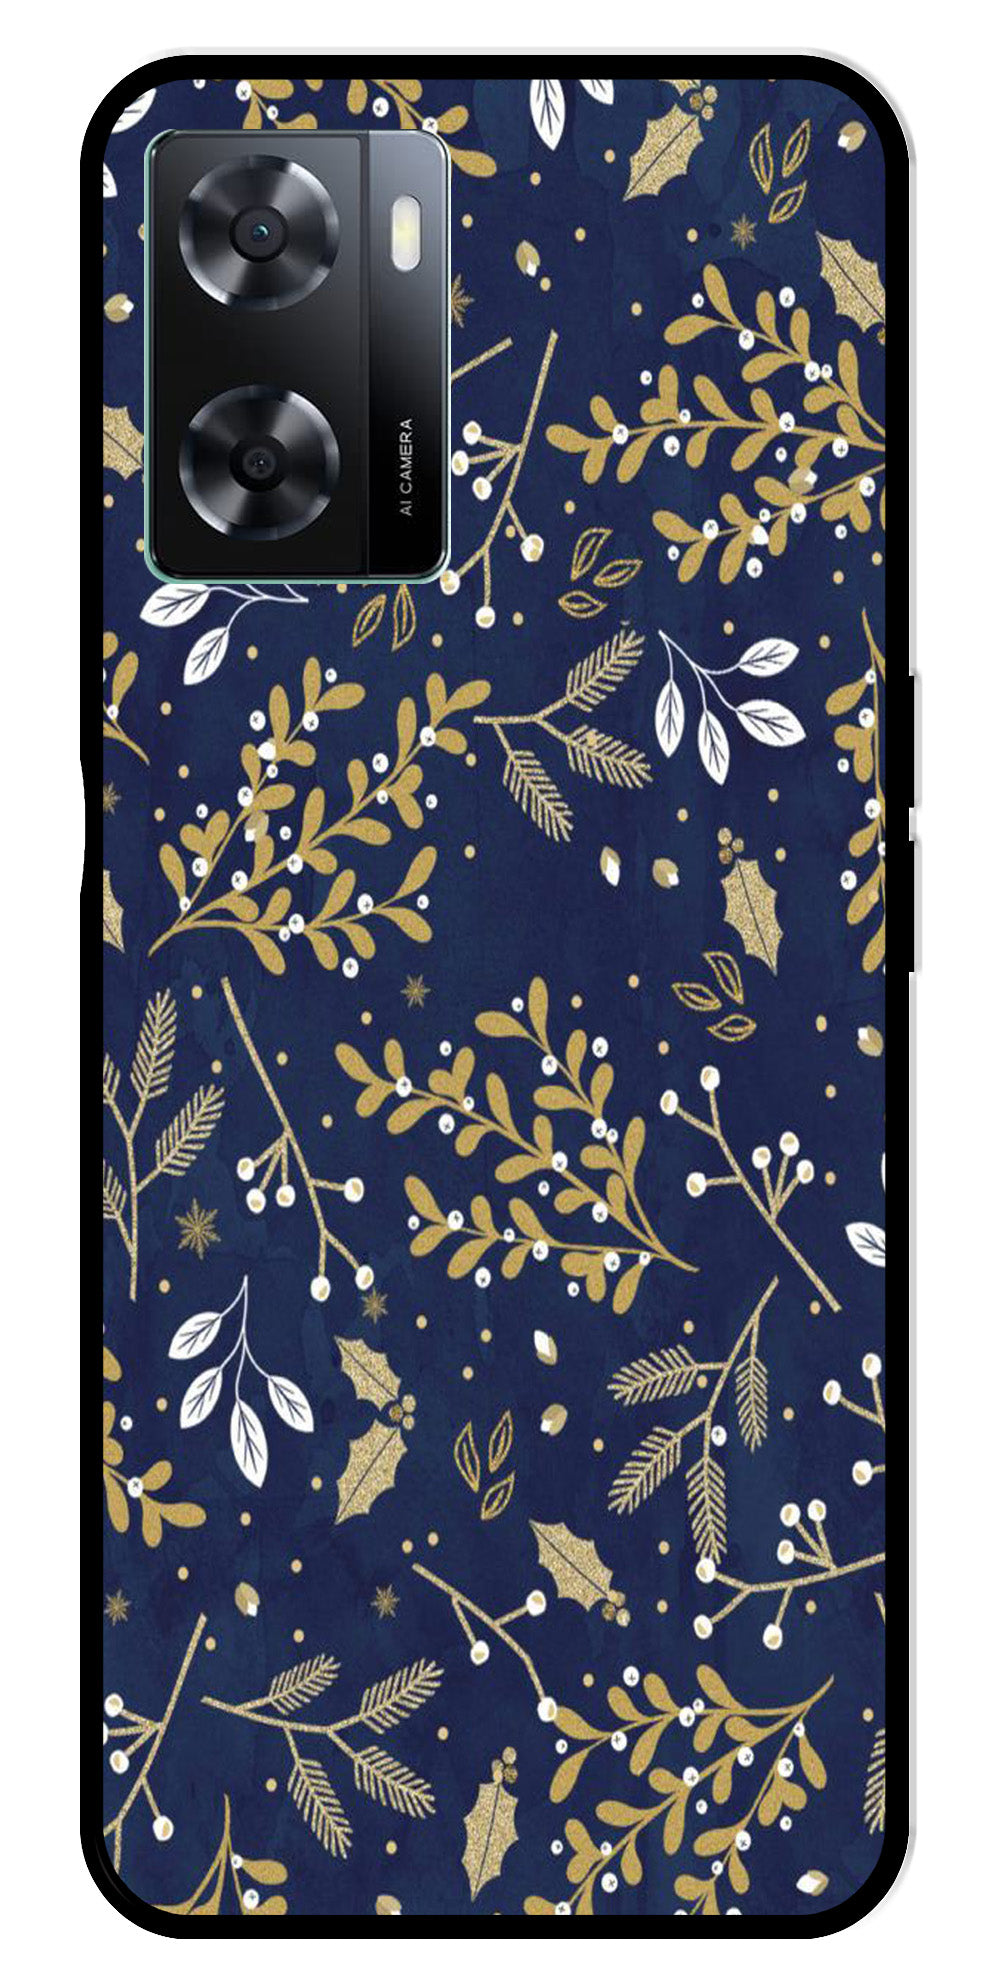 Floral Pattern  Metal Mobile Case for Oppo A57 4G   (Design No -52)